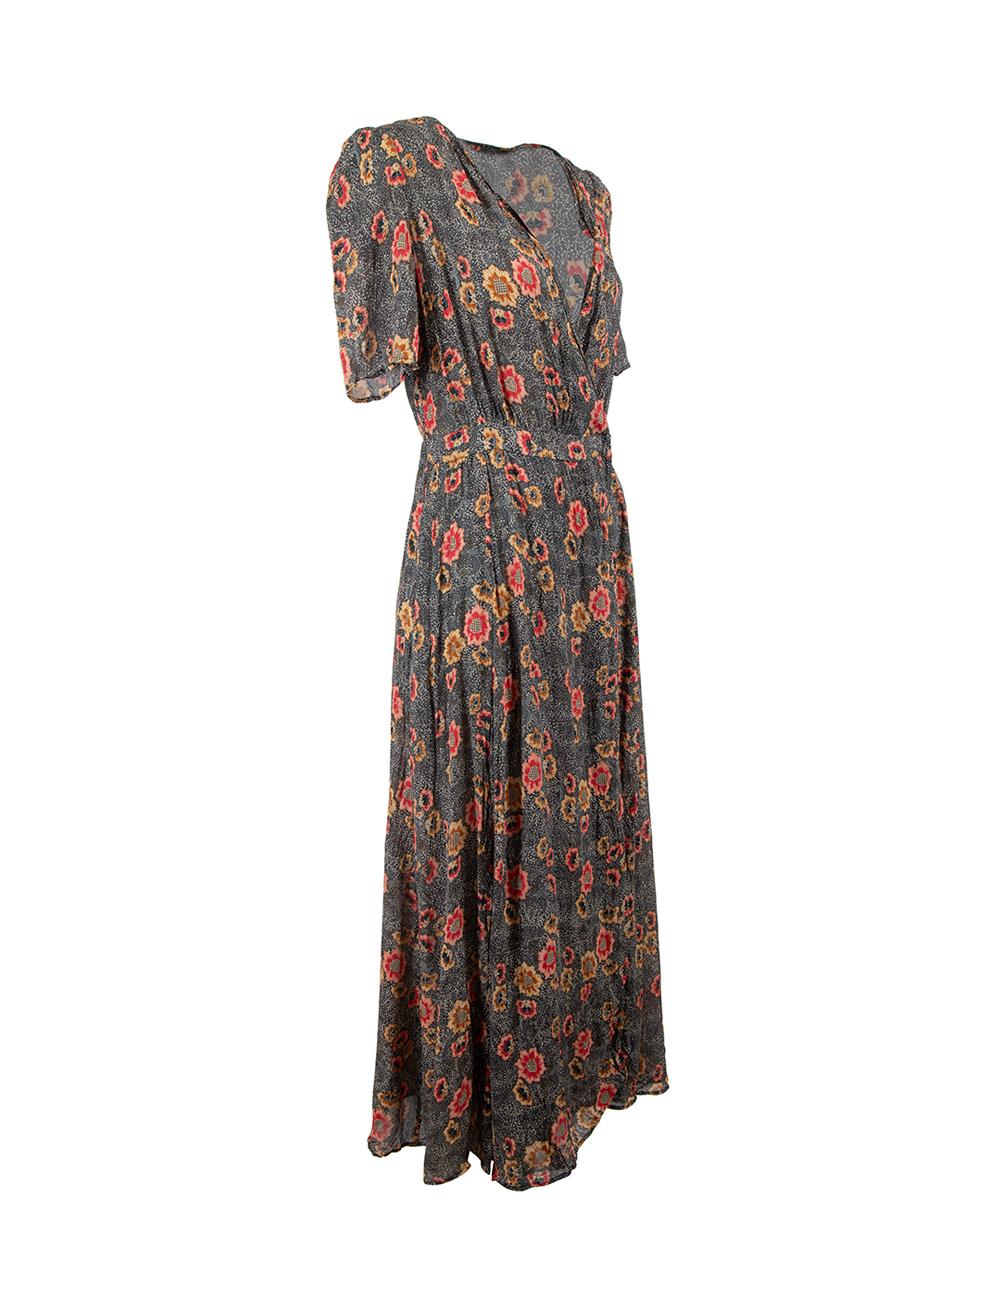 CONDITION is Very good. Hardly any wear to dress is evident on this used Isabel Marant Étoile designer resale item. 



Details


Grey

Viscose

Midi wrap dress

Floral print pattern

Short sleeves

V neckline

Front snap buttons closure





Made